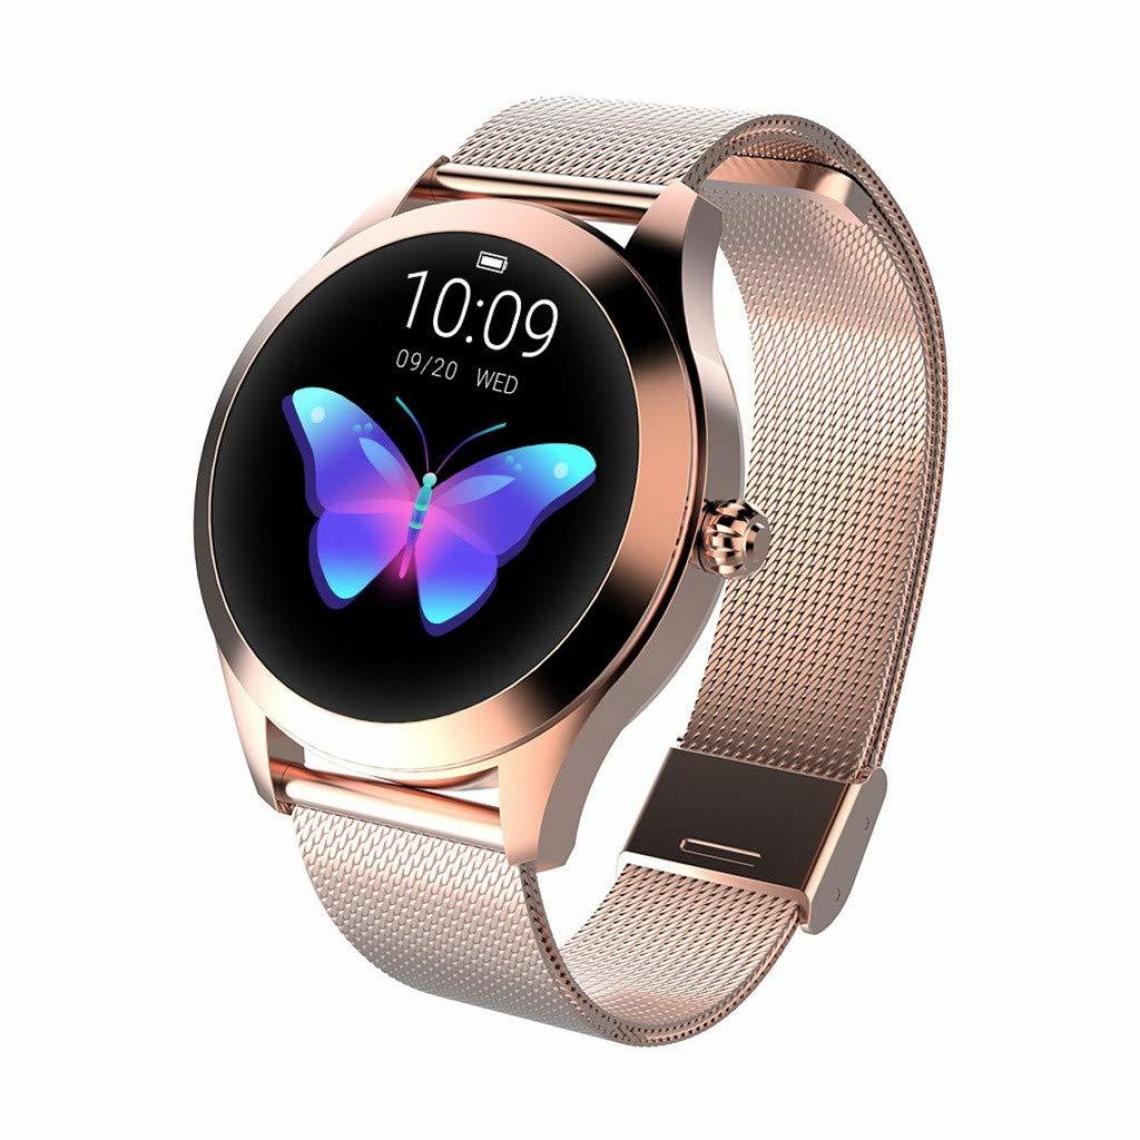 Chronotech Montres - Chronus Smart Watch KW10, Round Touch Screen IP68 Waterproof Smartwatch for Women, Fitness Tracker with Heart Rate and Sleep Pedometer, Bracelet for iOS/Android(gold) - Montre connectée